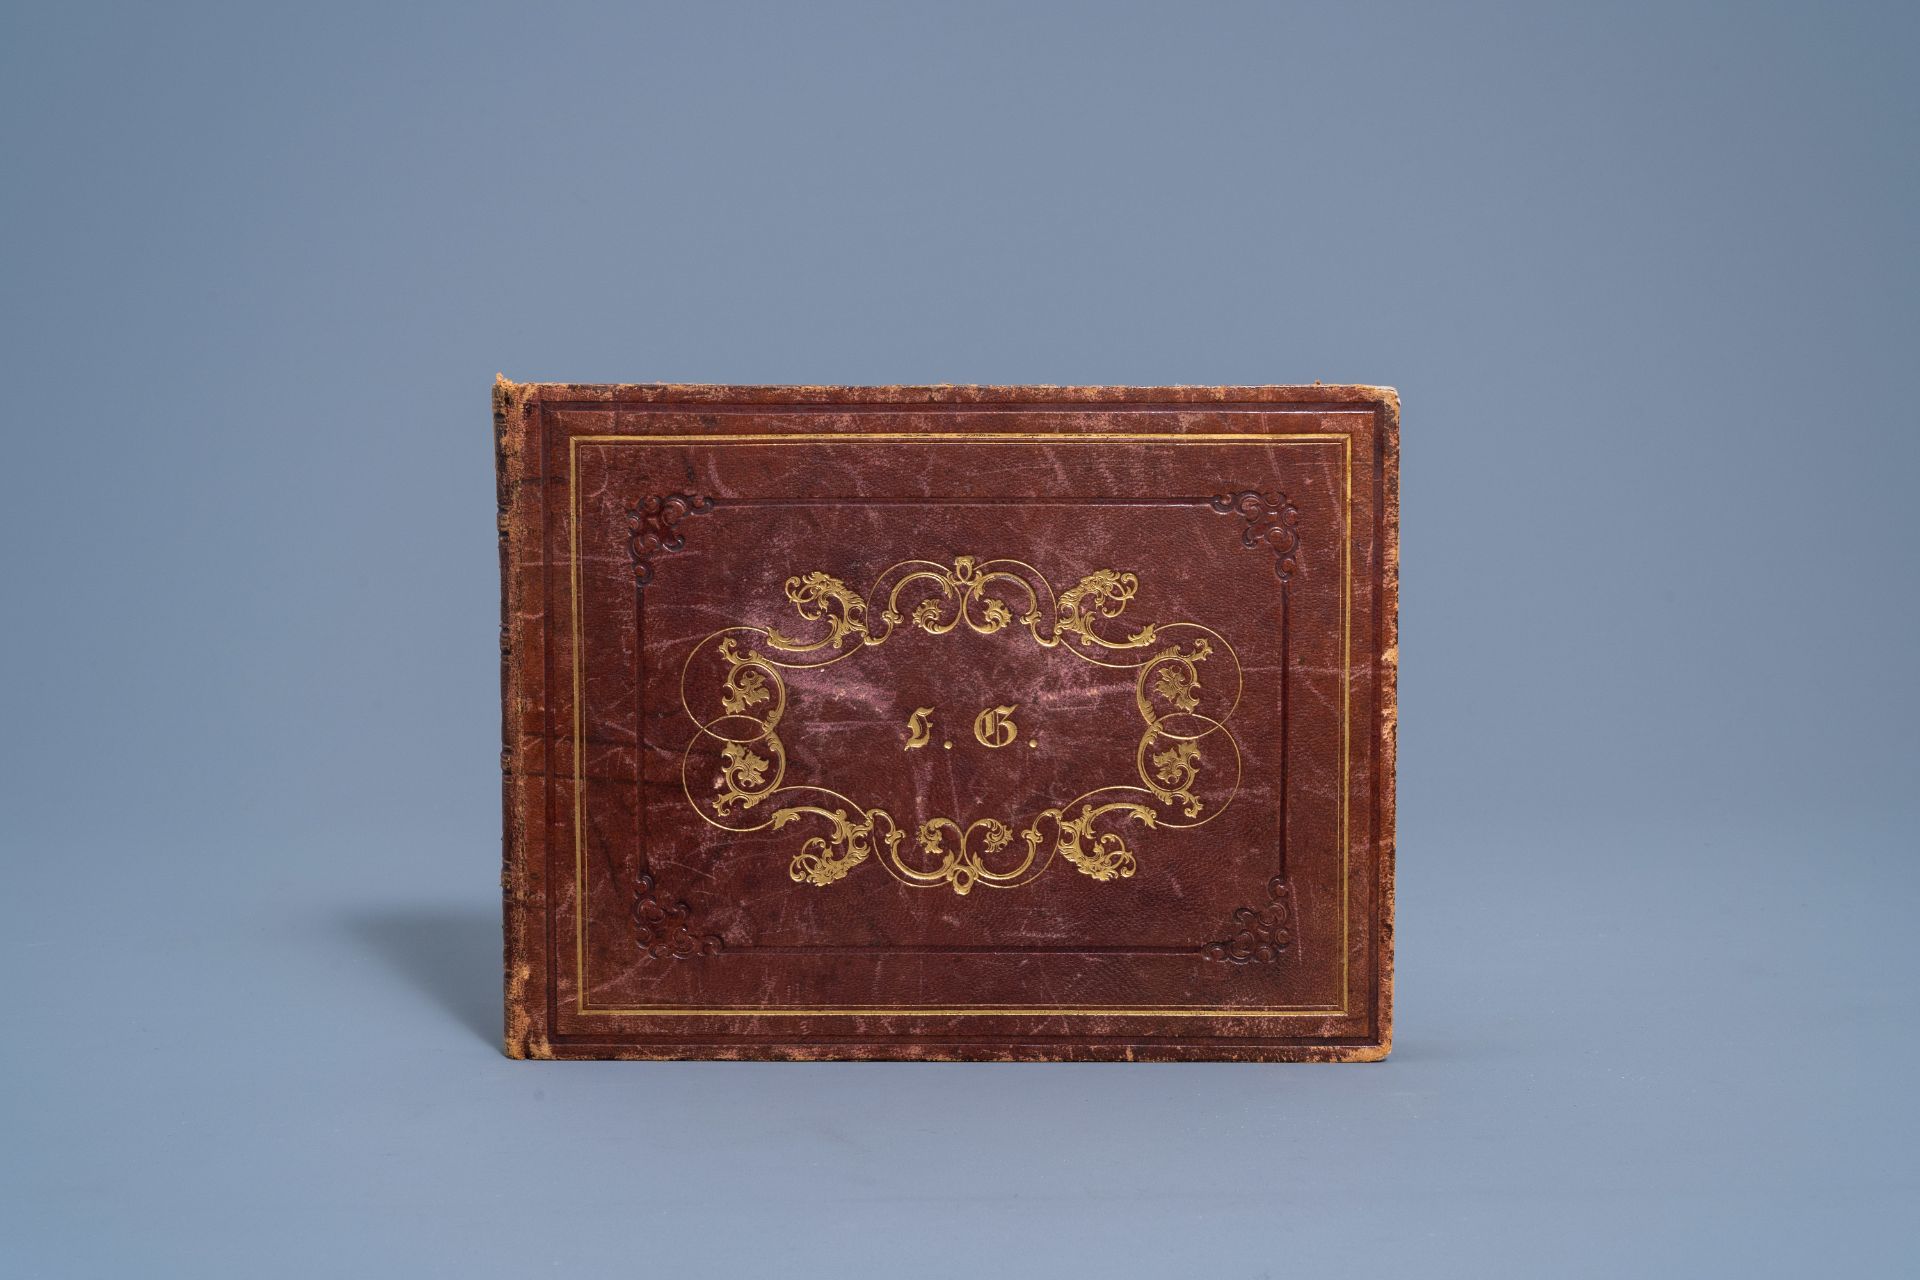 An album amicorum with monogram F.G. with various drawings, etchings and engravings, dated 1842 - Bild 2 aus 15